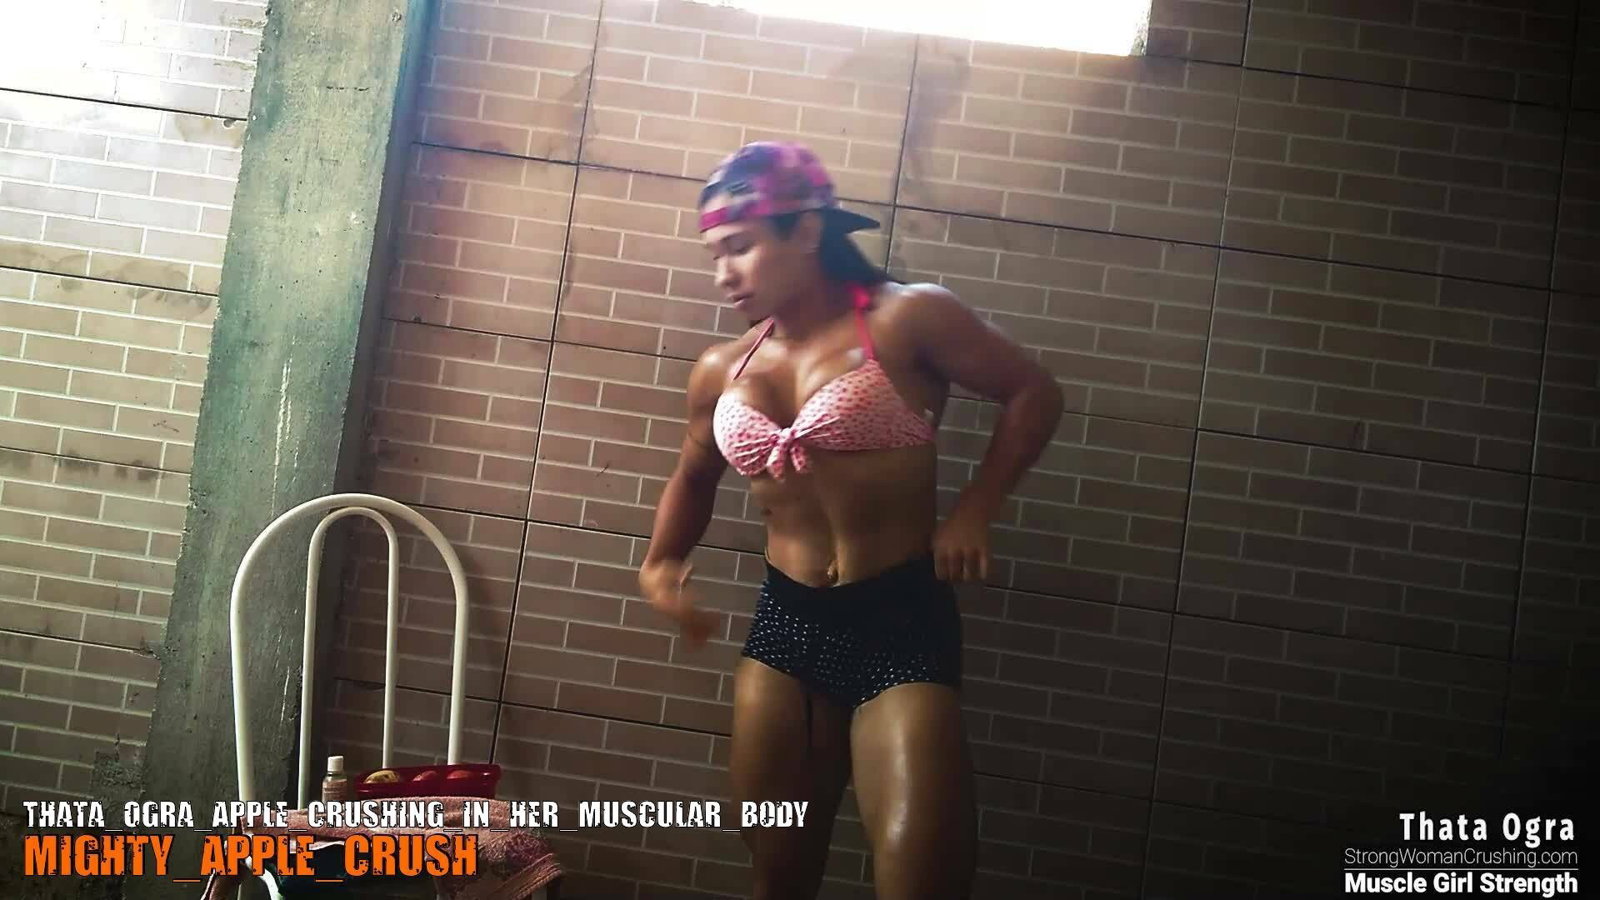 Photo by MusclegirlStrength with the username @MusclegirlStrength, who is a brand user,  October 24, 2023 at 11:45 PM and the text says '💥www.strongwomancrushing.com 🔒

🎥 Get Exclusive Access to Thata Ogra's Apple Crushing Video! 🍎💪

Join our membership and witness Thata Ogra's incredible strength!

#femalebodybuilders #musclewomen #strongwomen #fitwomen #shreddedgirls..'